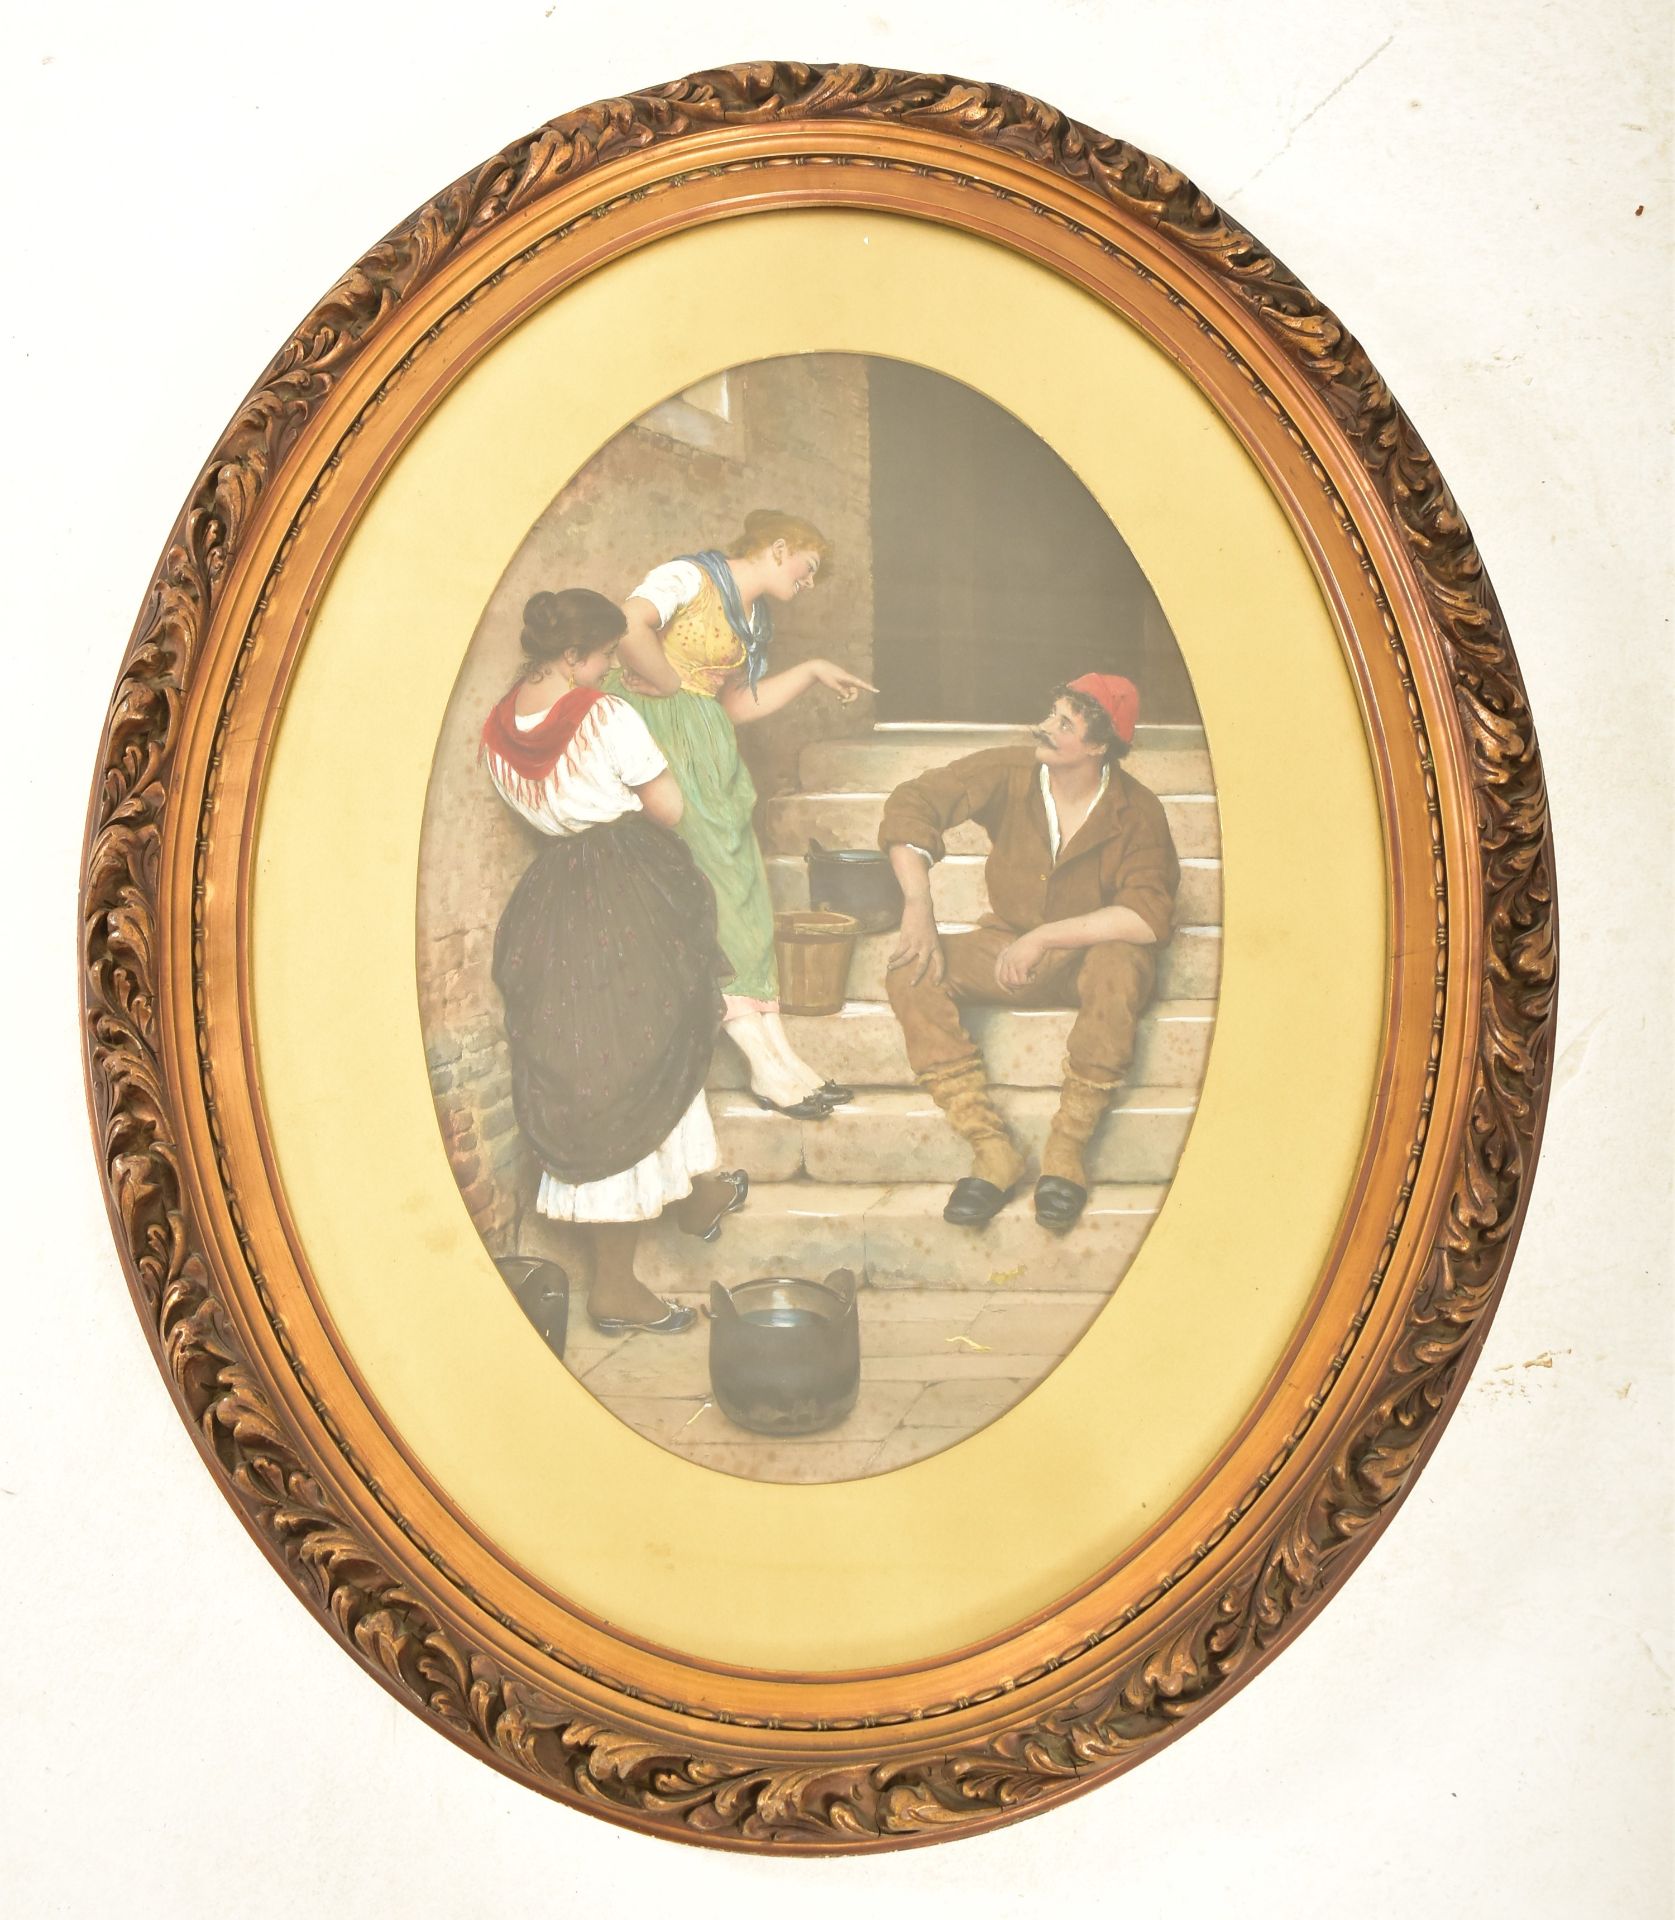 PAIR OF 19TH CENTURY NEO-BAROQUE STYLE OLEOGRAPHS - Image 3 of 7